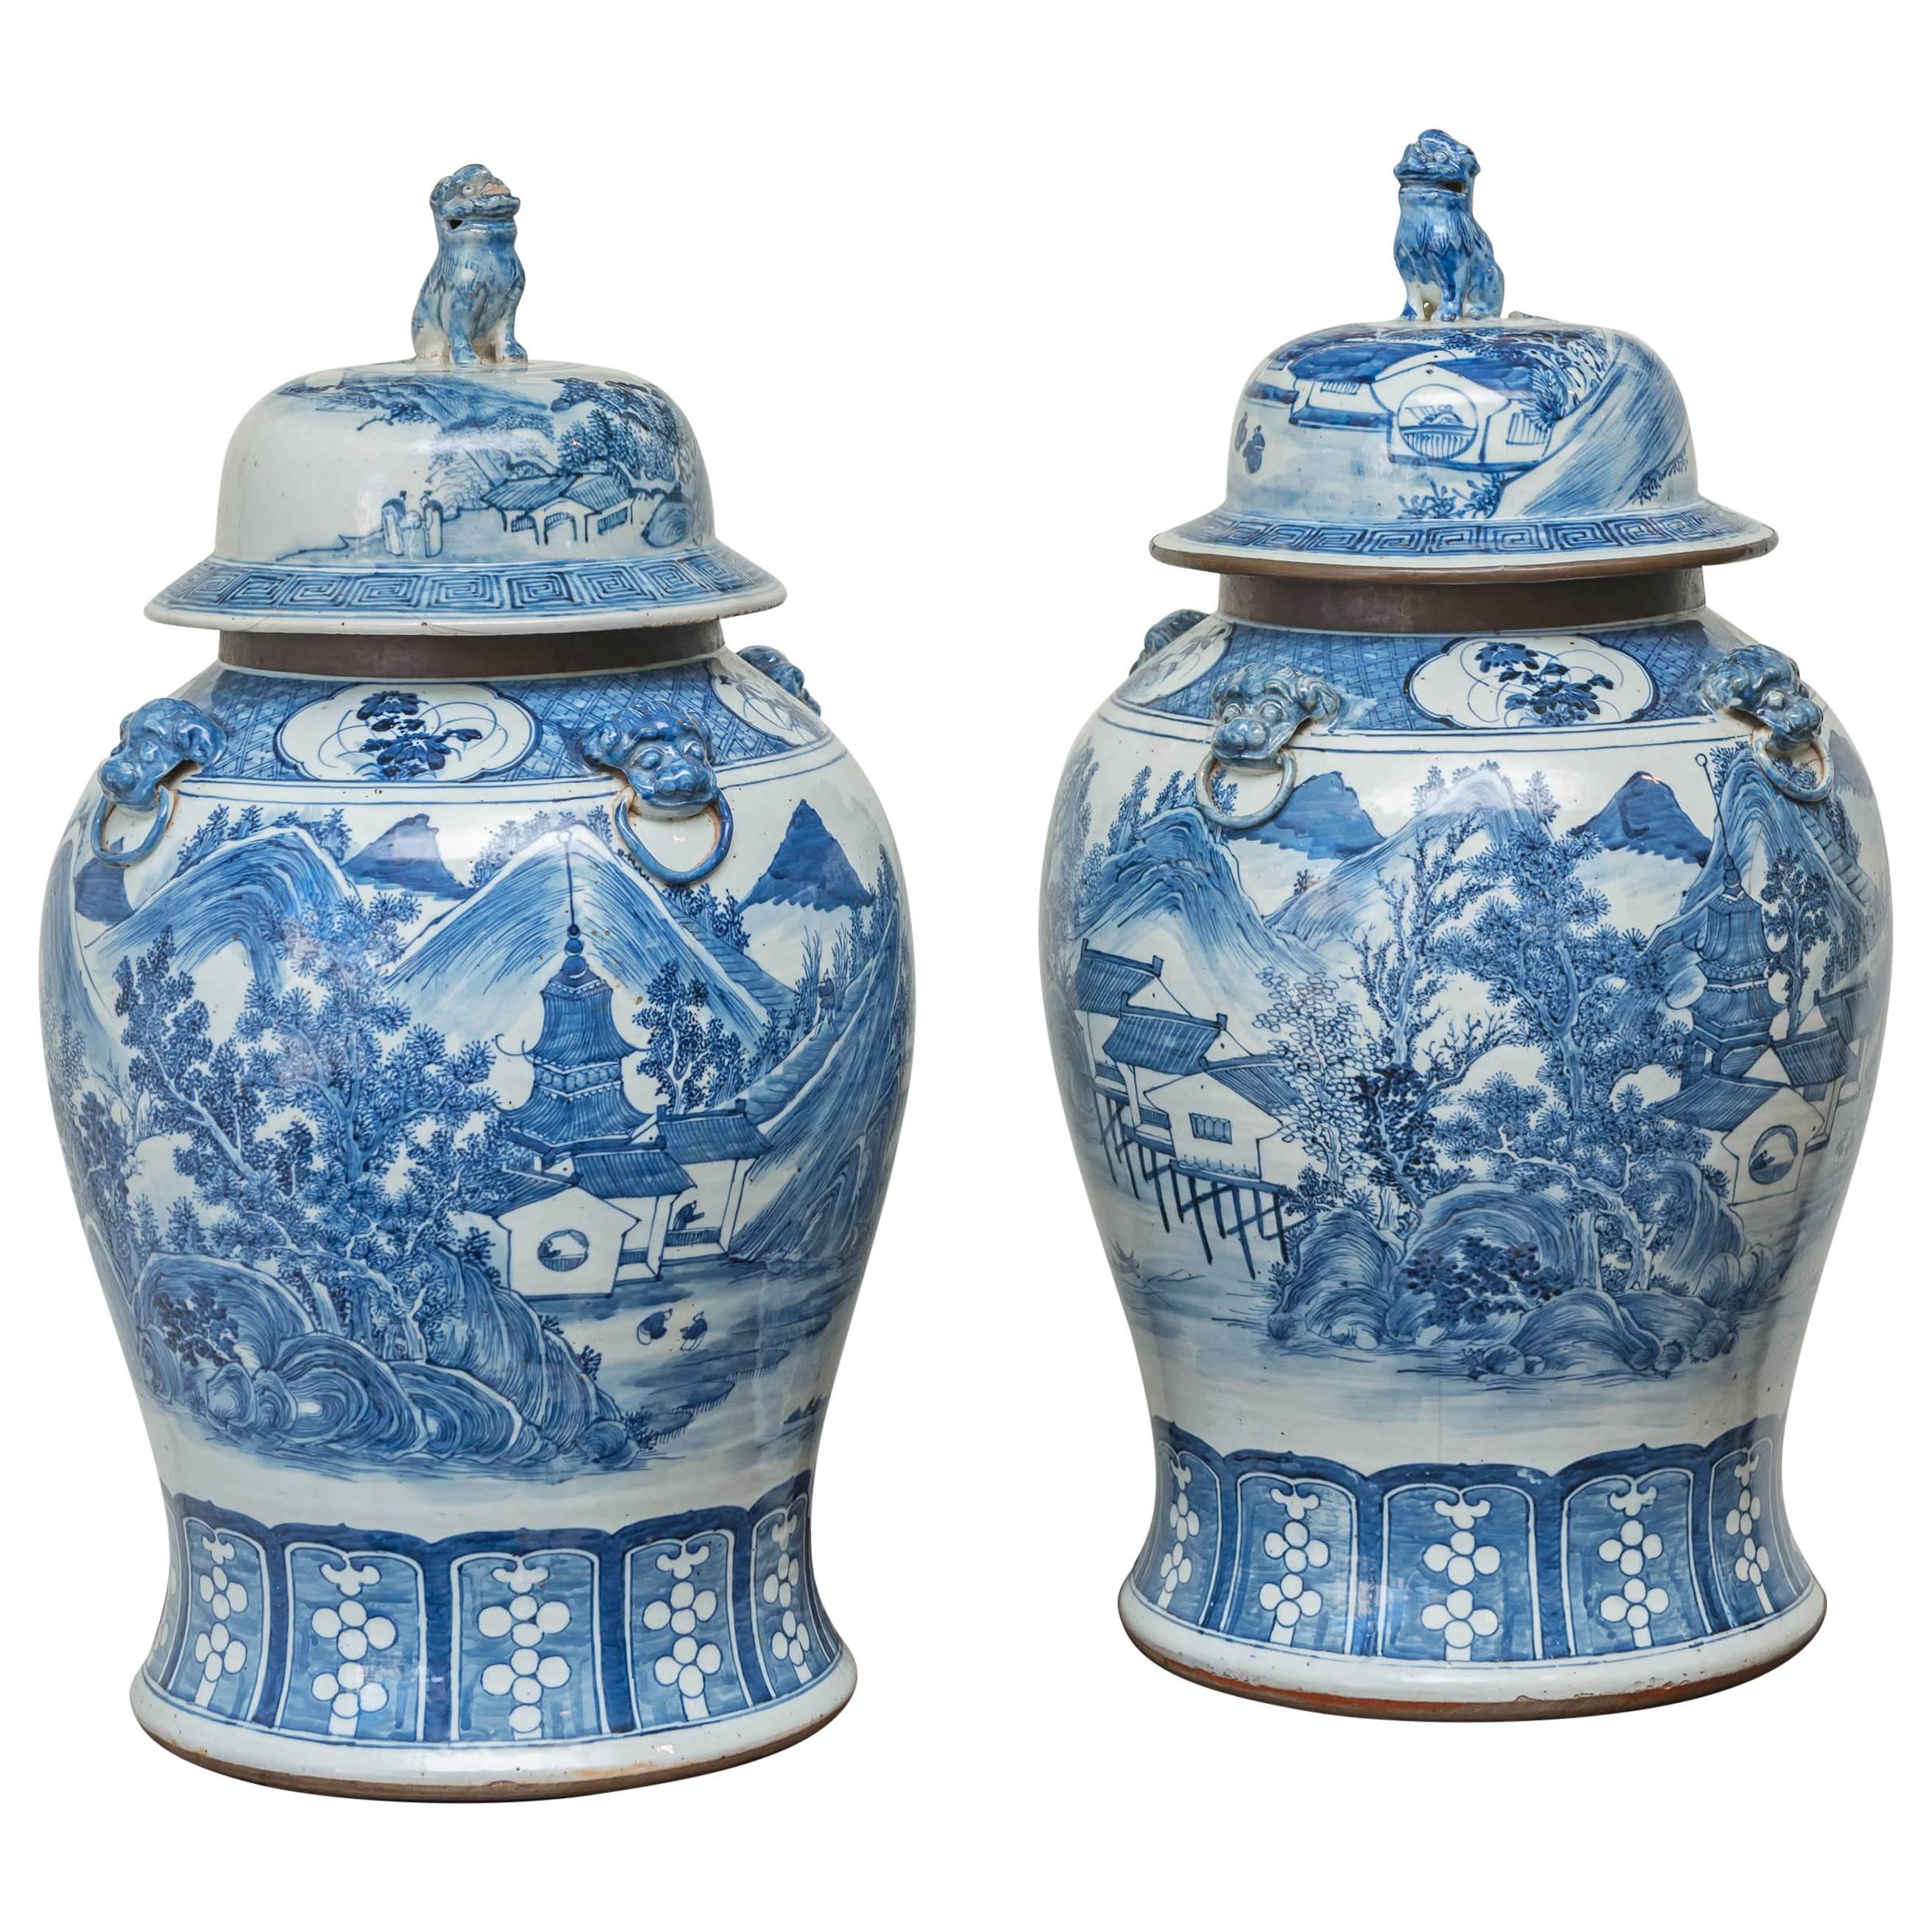 Pair of 19th Century Chinese Blue and White Porcelain Cap Jars, circa 1825